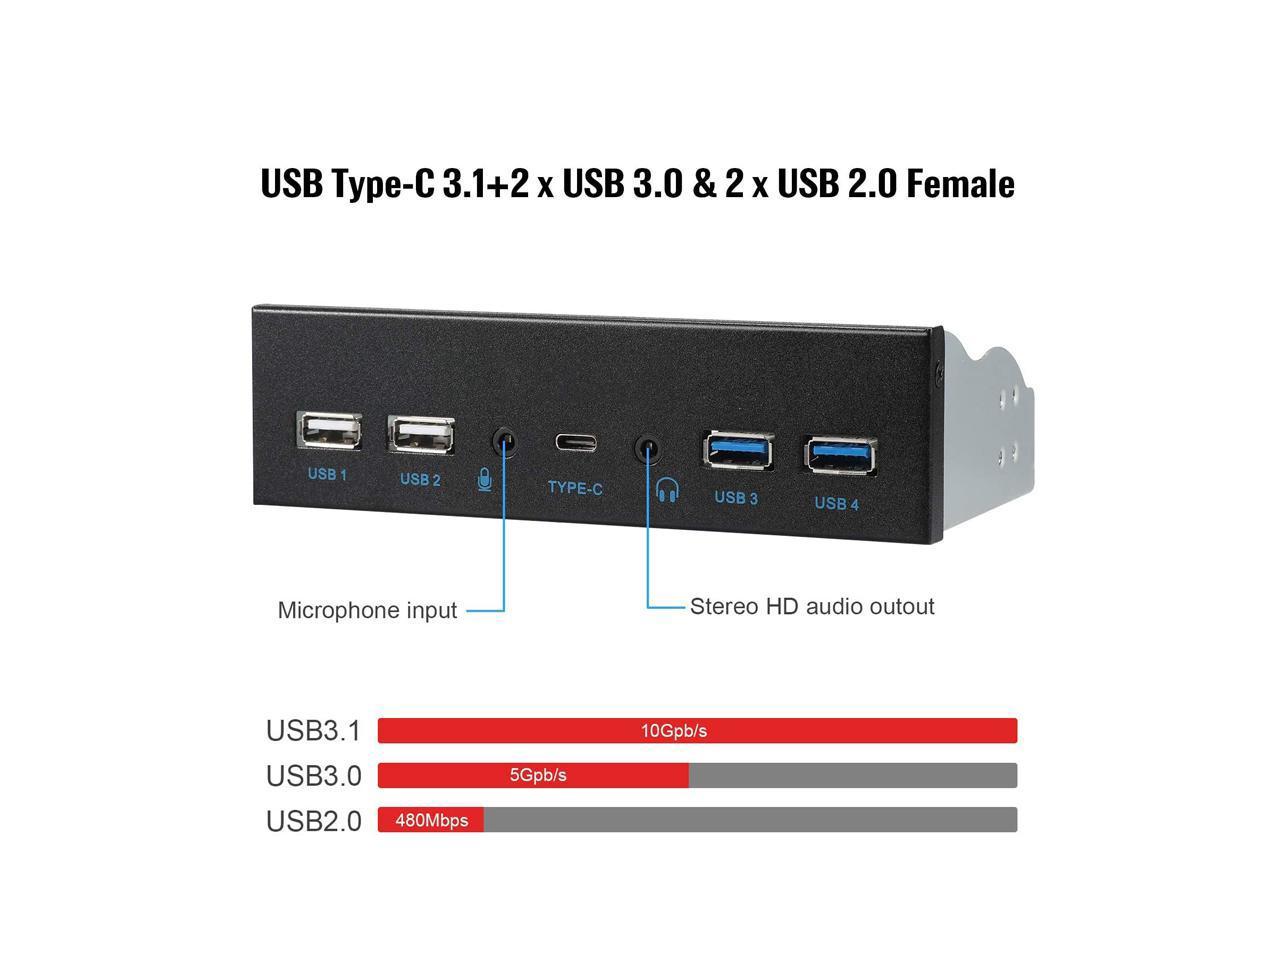 20 Pin Connector & 2ft Adapter Cable UCEC 5.25 Inch Front Panel USB Hub with 2-Port USB 3.0 & 2-Port USB 2.0 & HD Audio Output Port & Microphone Input Port for Desktop 